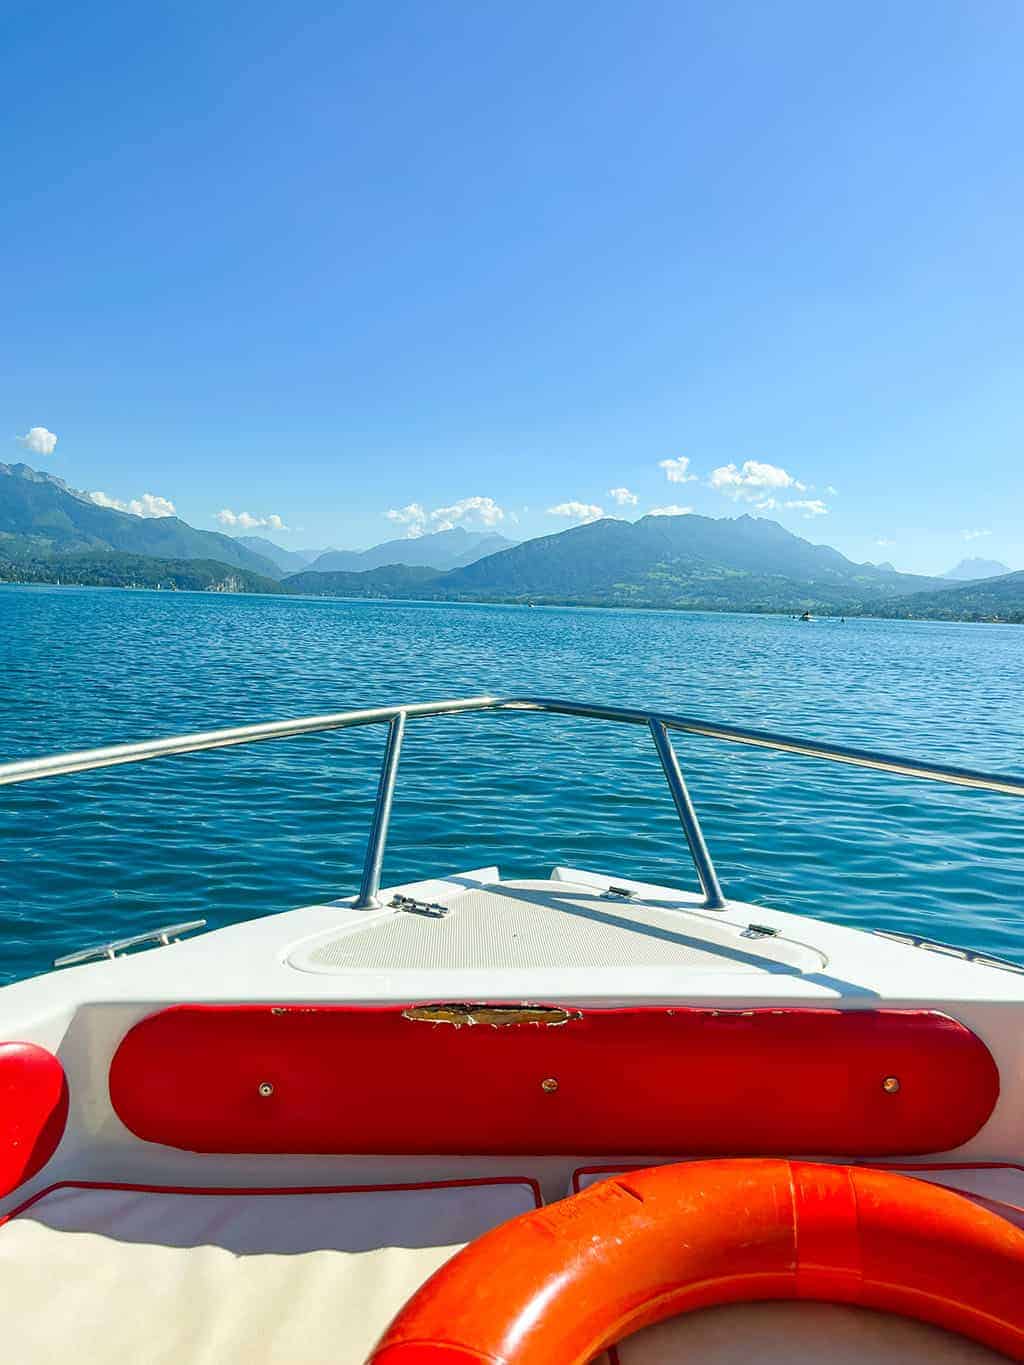 Renting an affordable boat in Annecy France on Lake Annecy